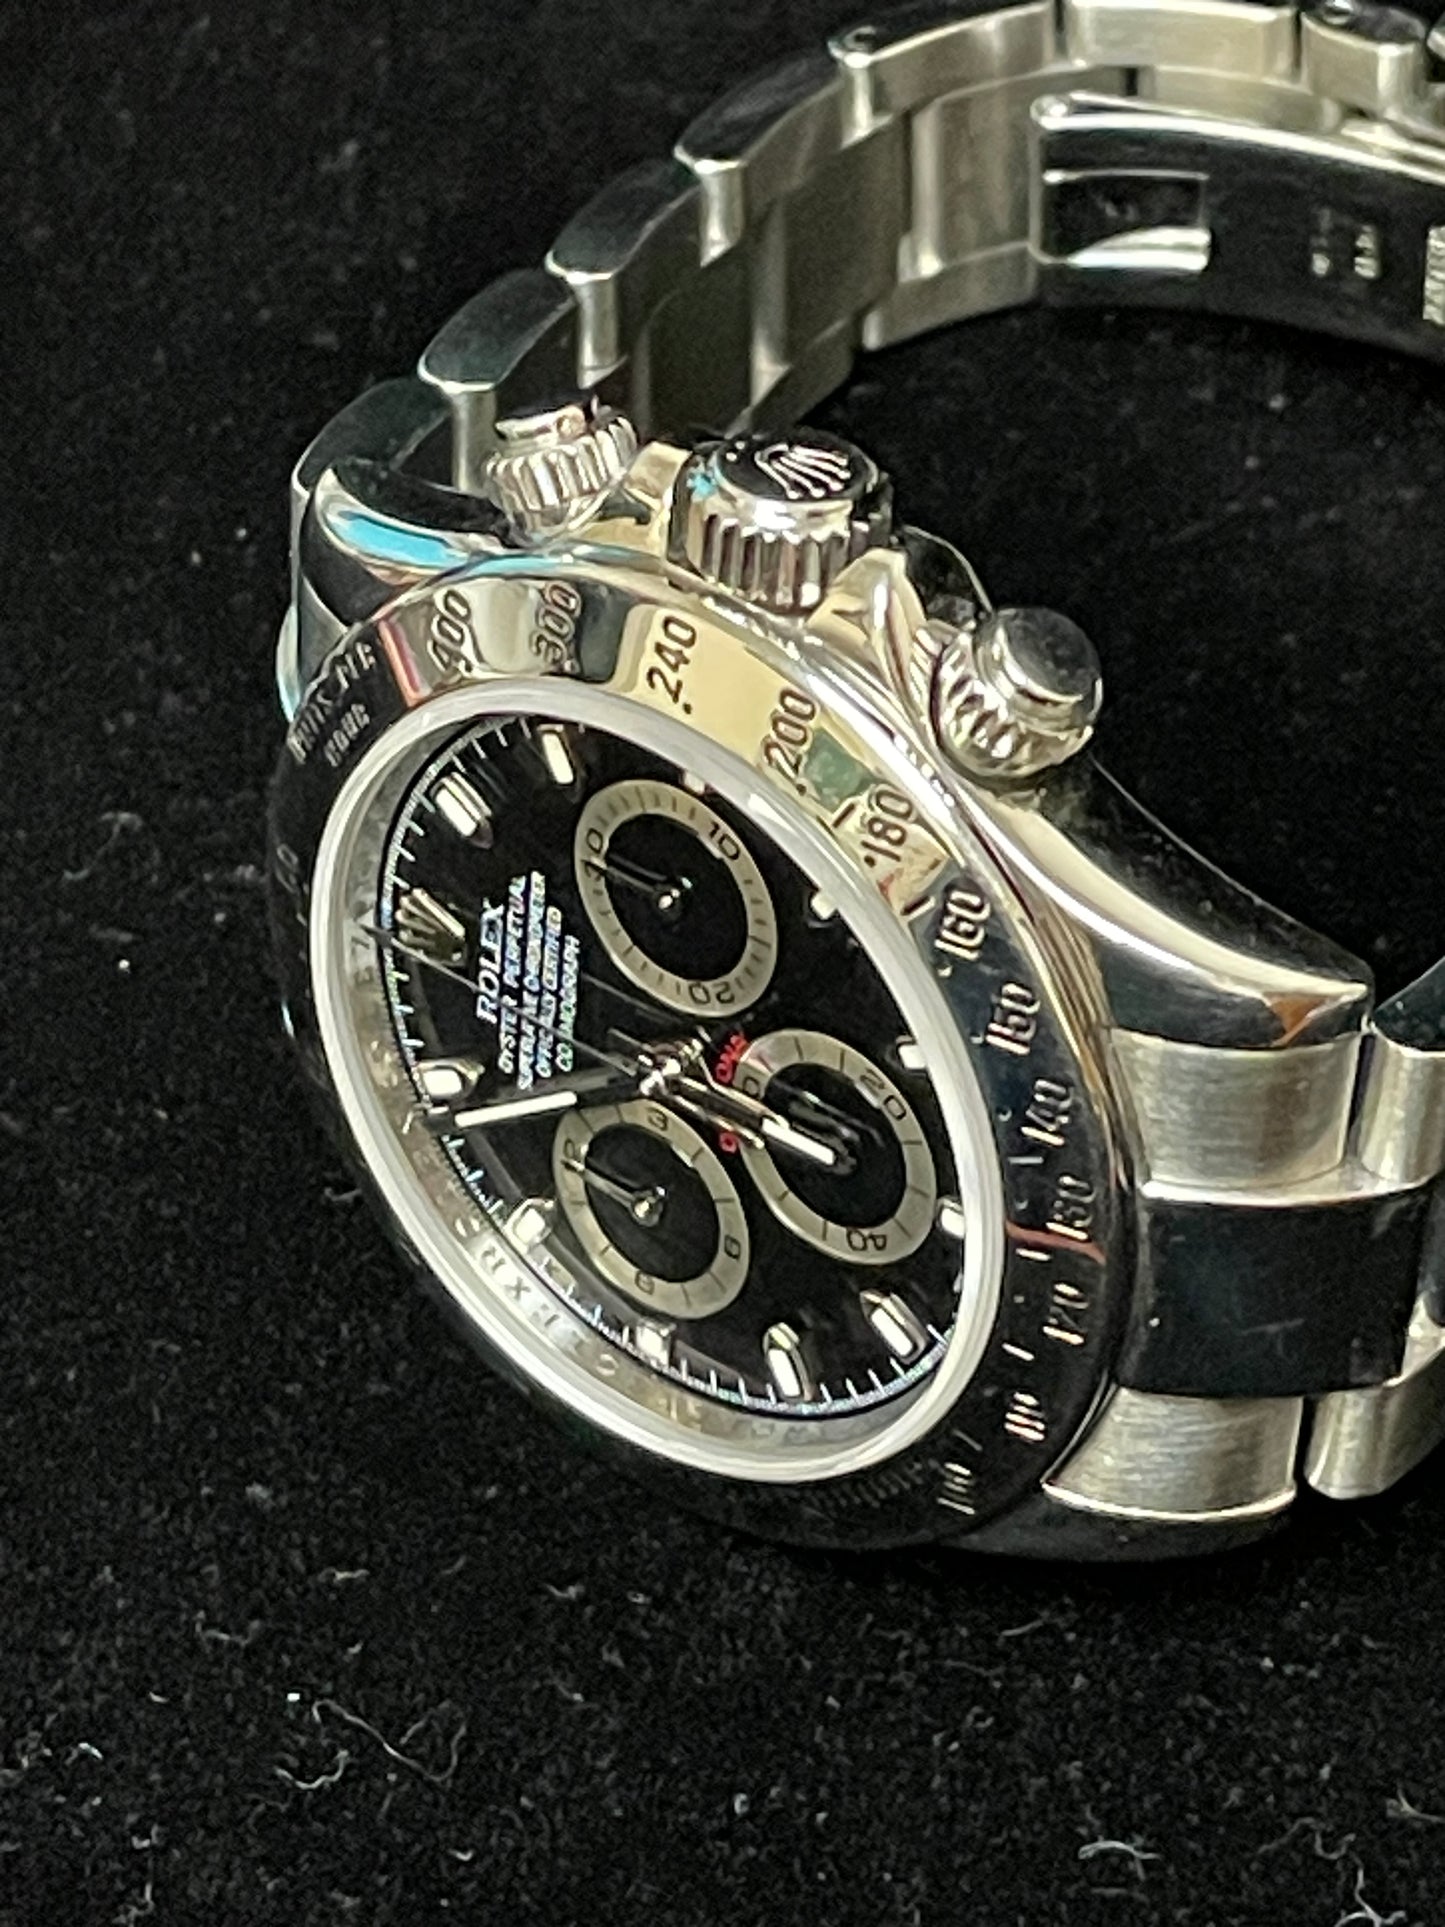 2007 Rolex Daytona 116520 Black Dial SS Oyster No Papers 40mm